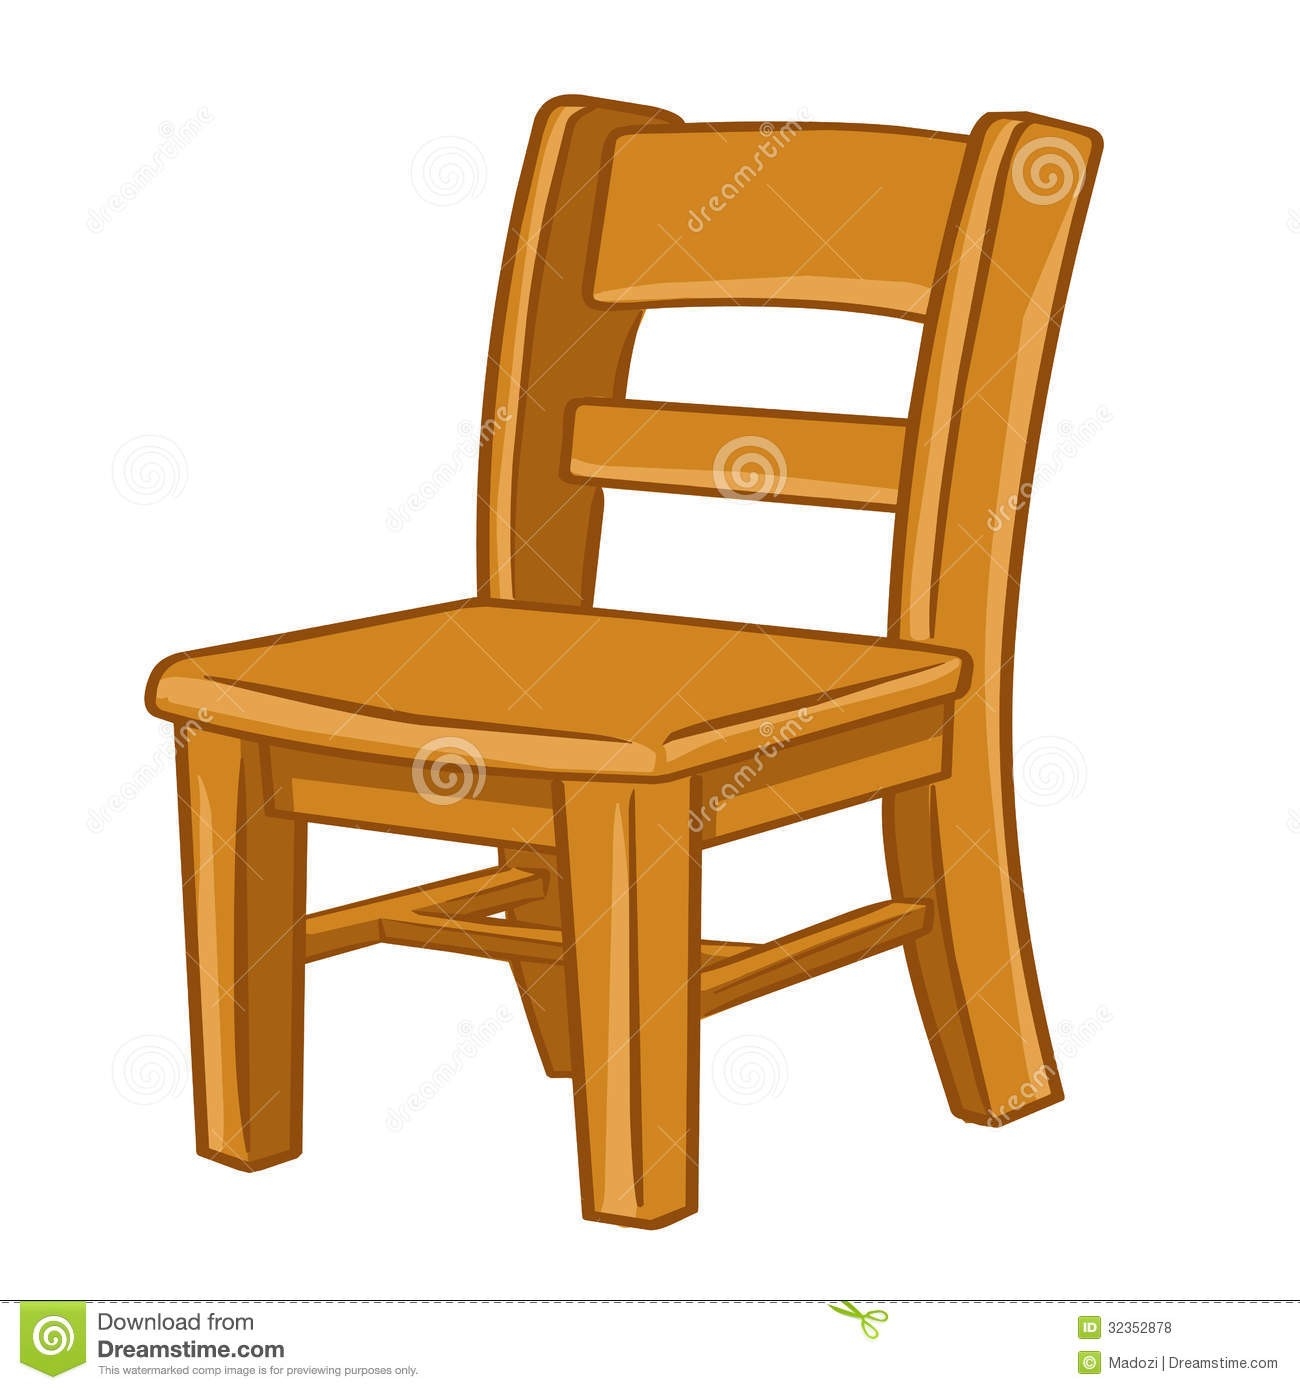 Chair Clip Art Free | Clipart Panda - Free Clipart Images with regard to Chair  Clipart